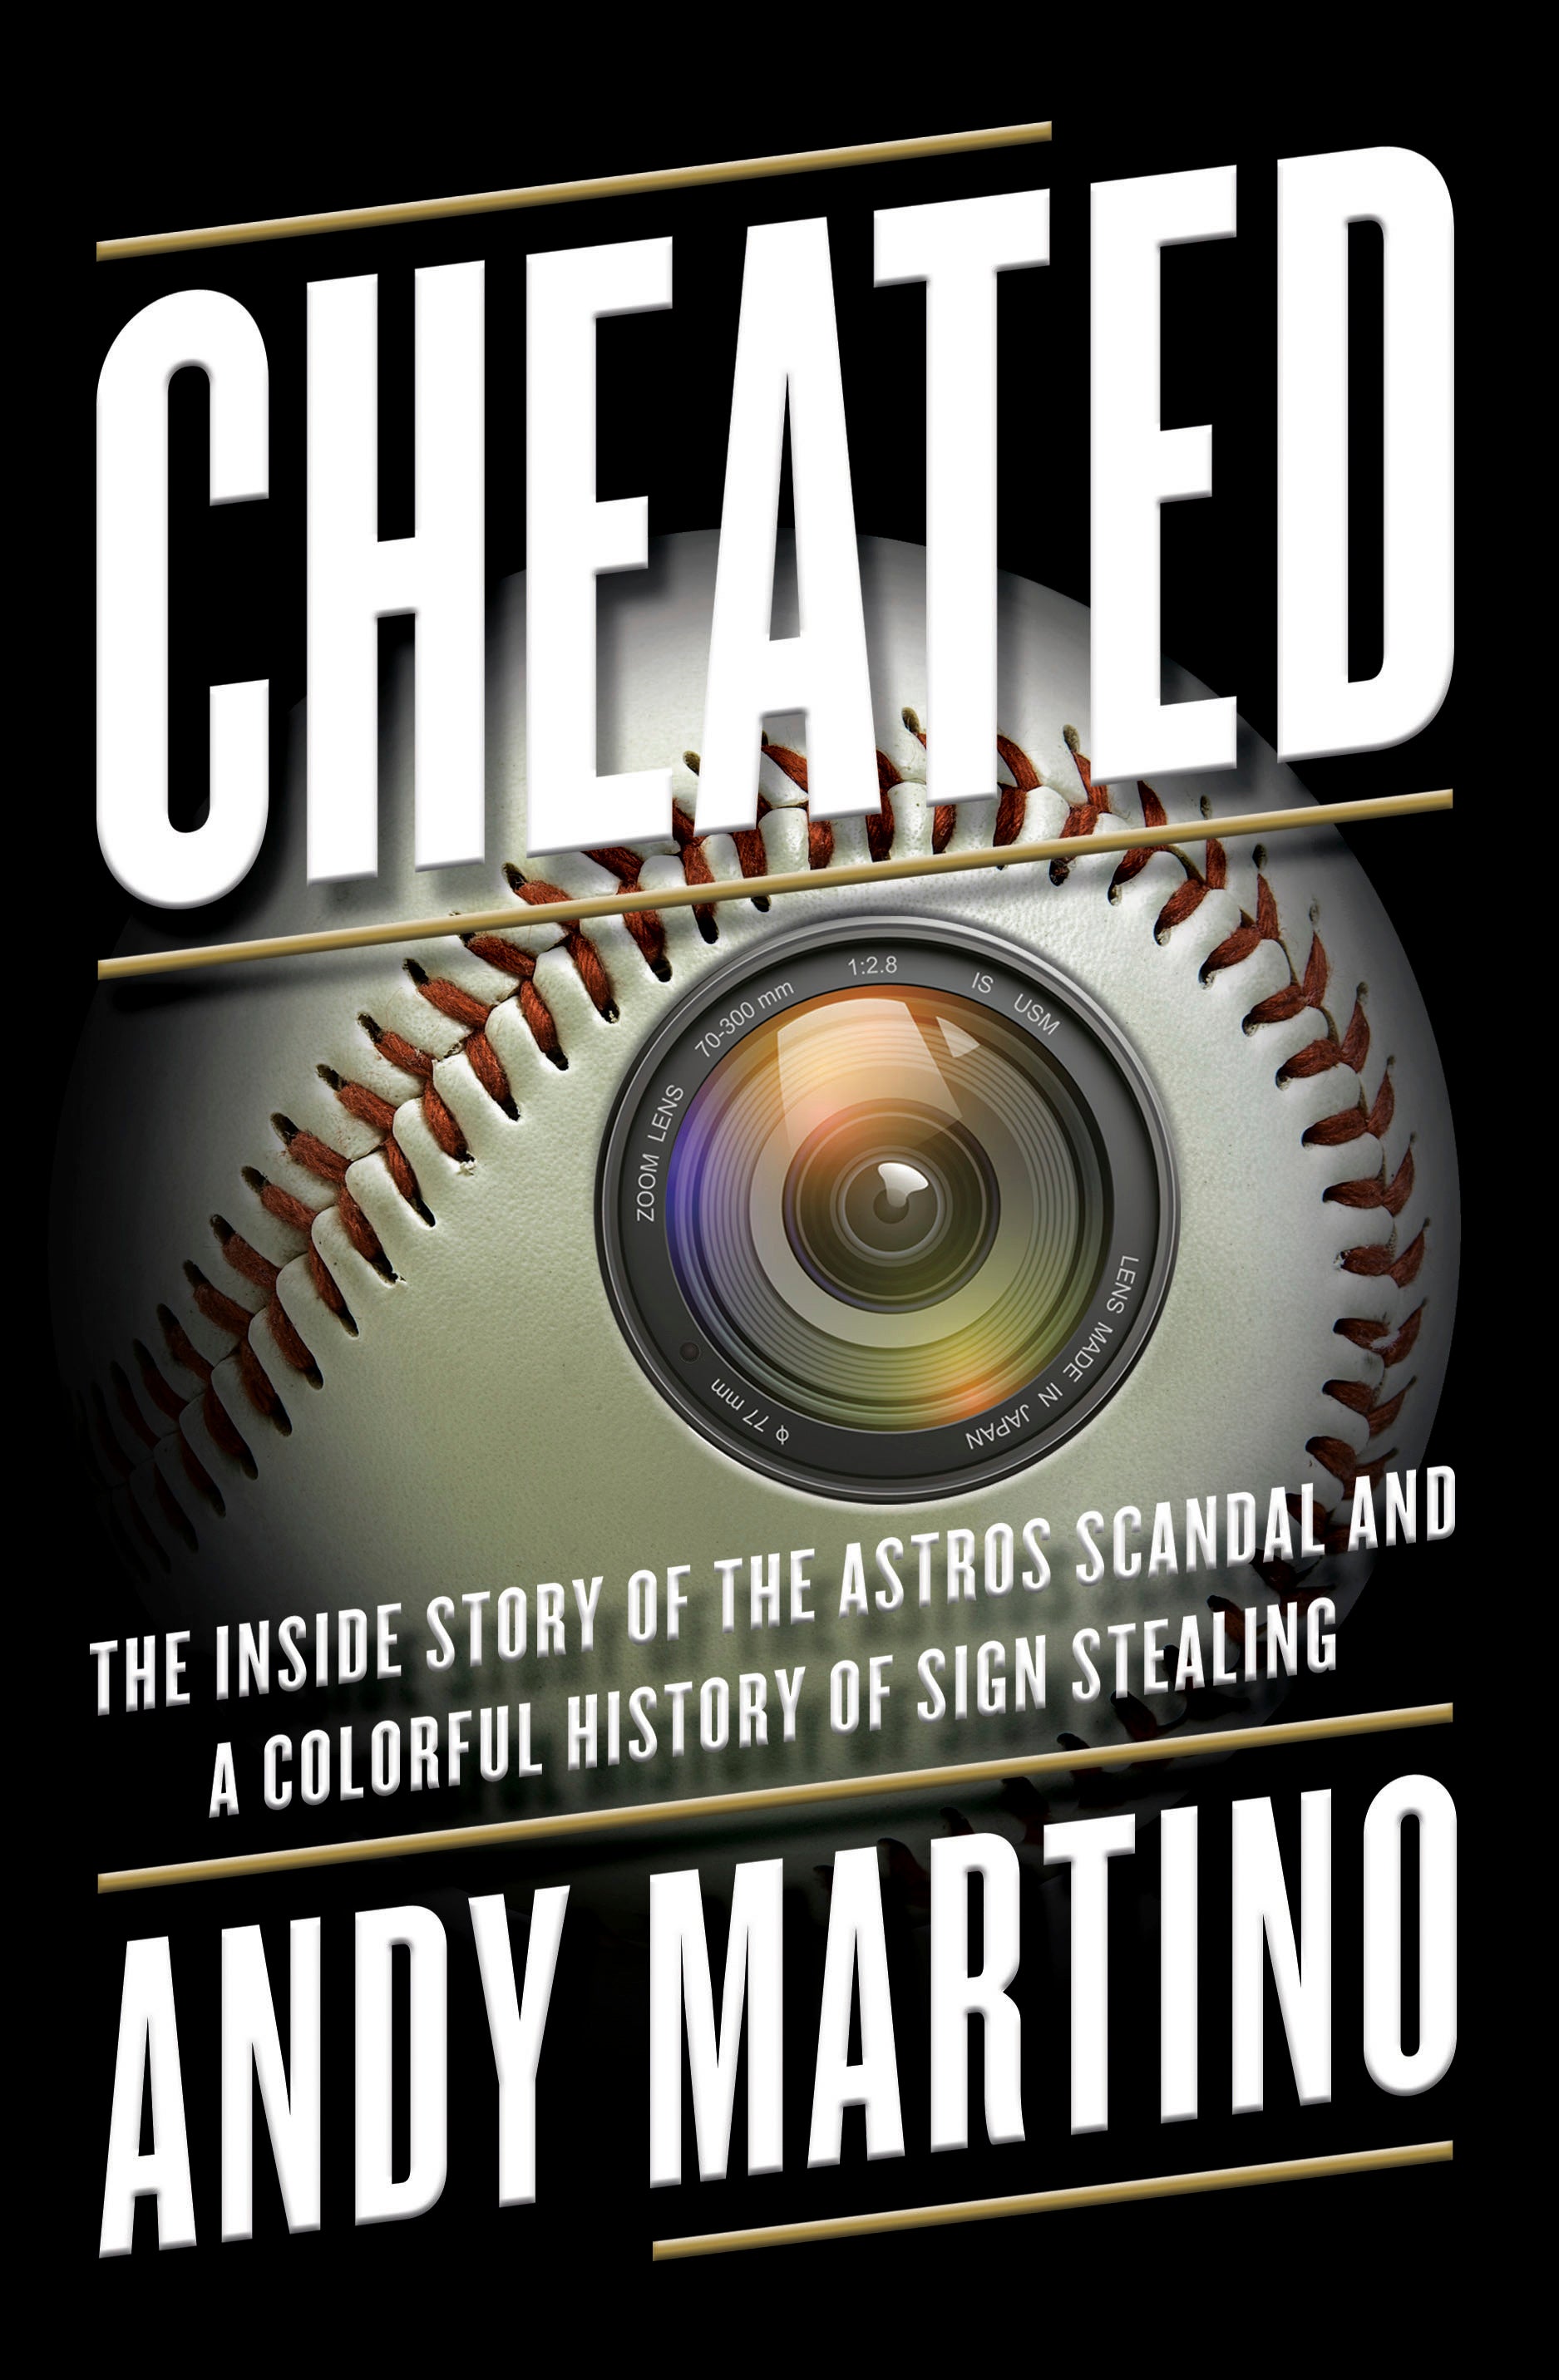 Book Review - Cheated